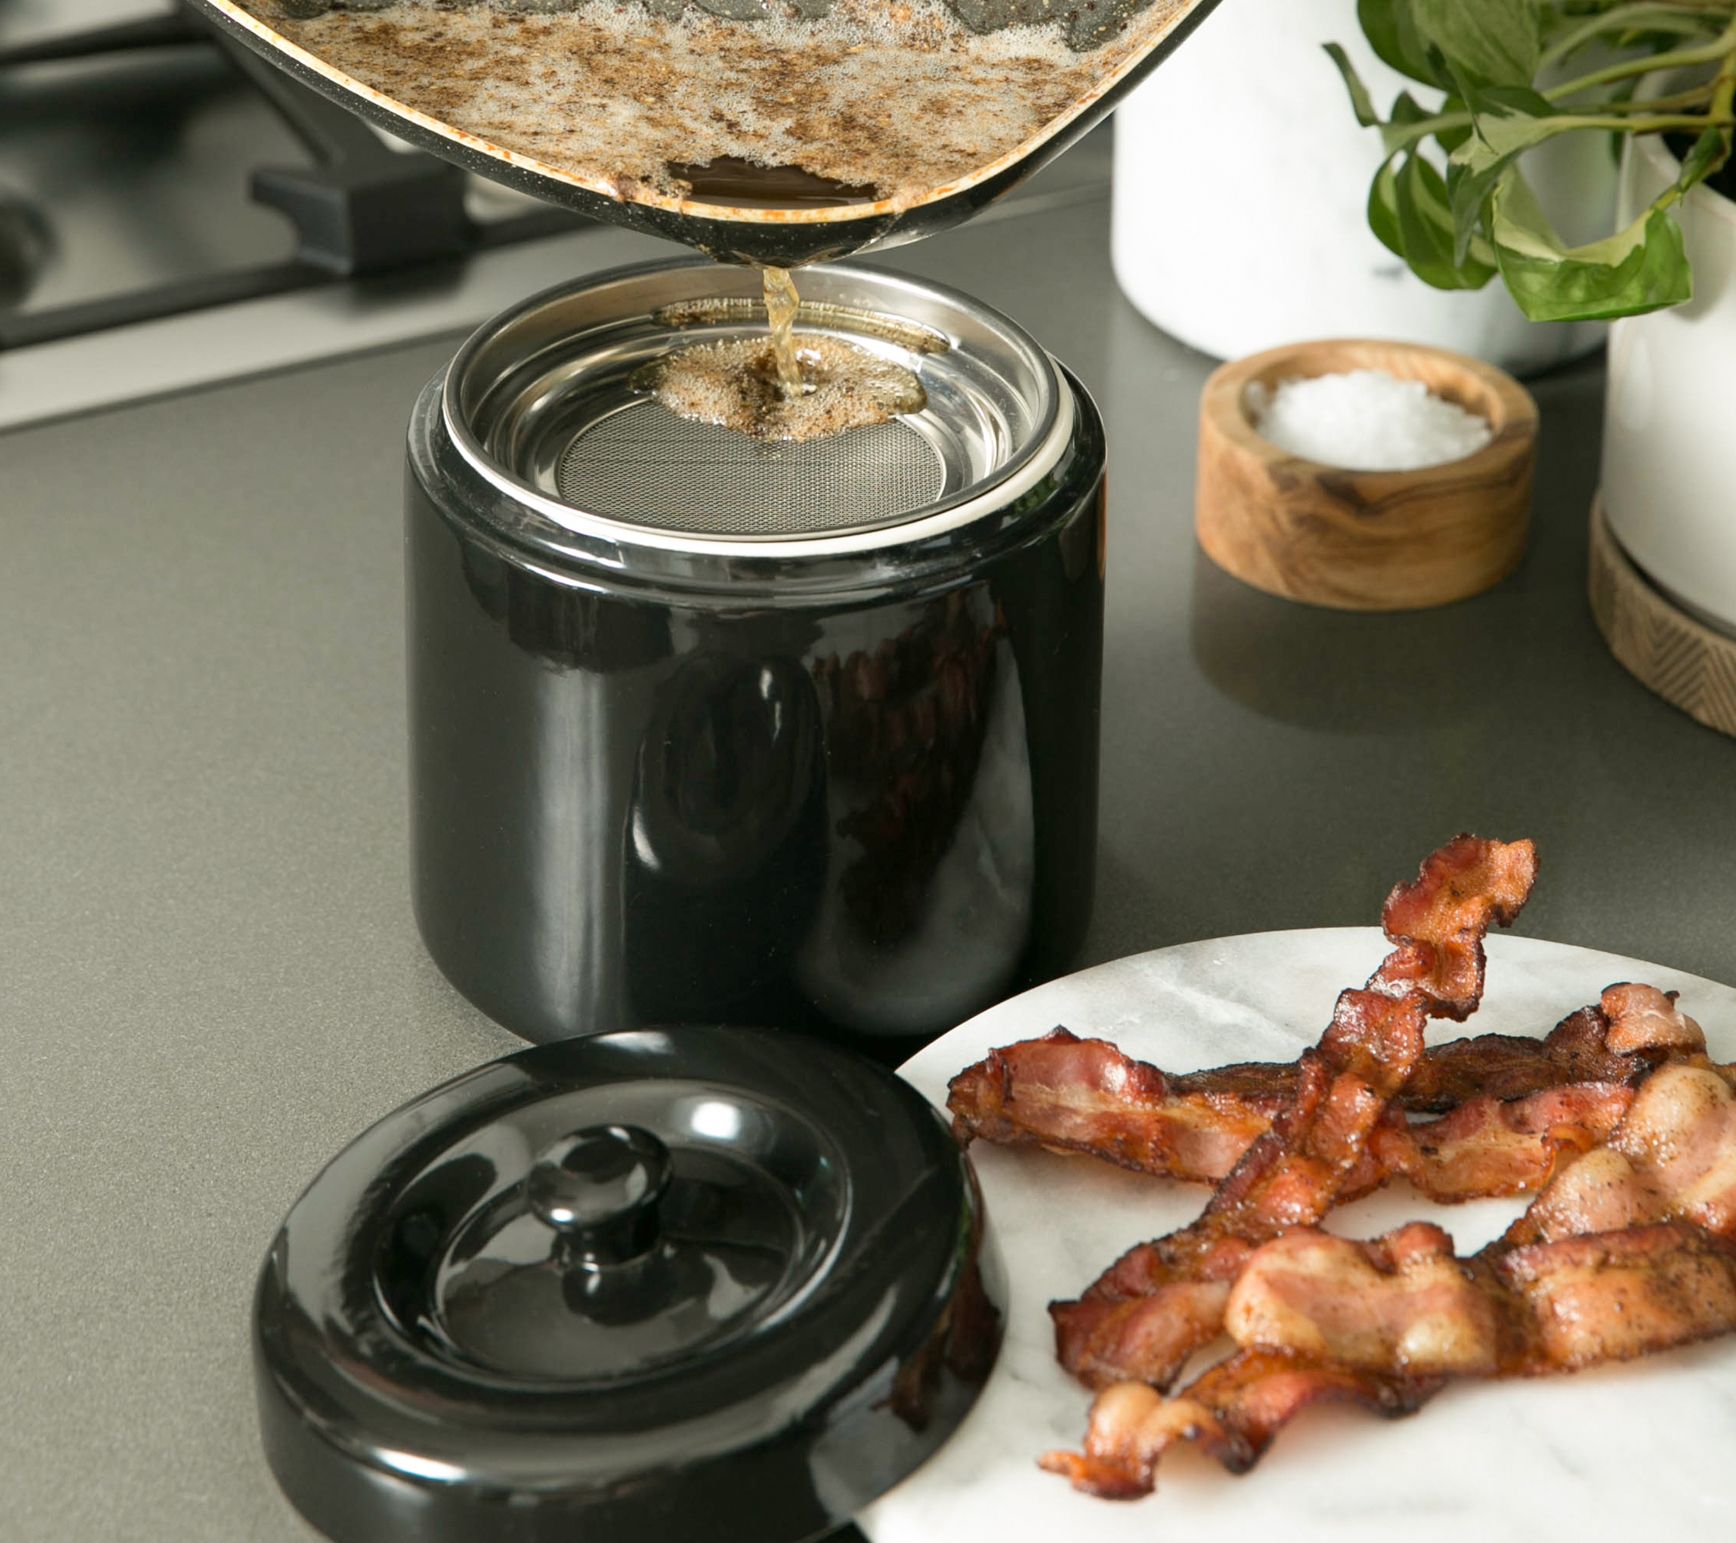 Ceramic Bacon Grease Container Keeper with Strainer, Frying Oil